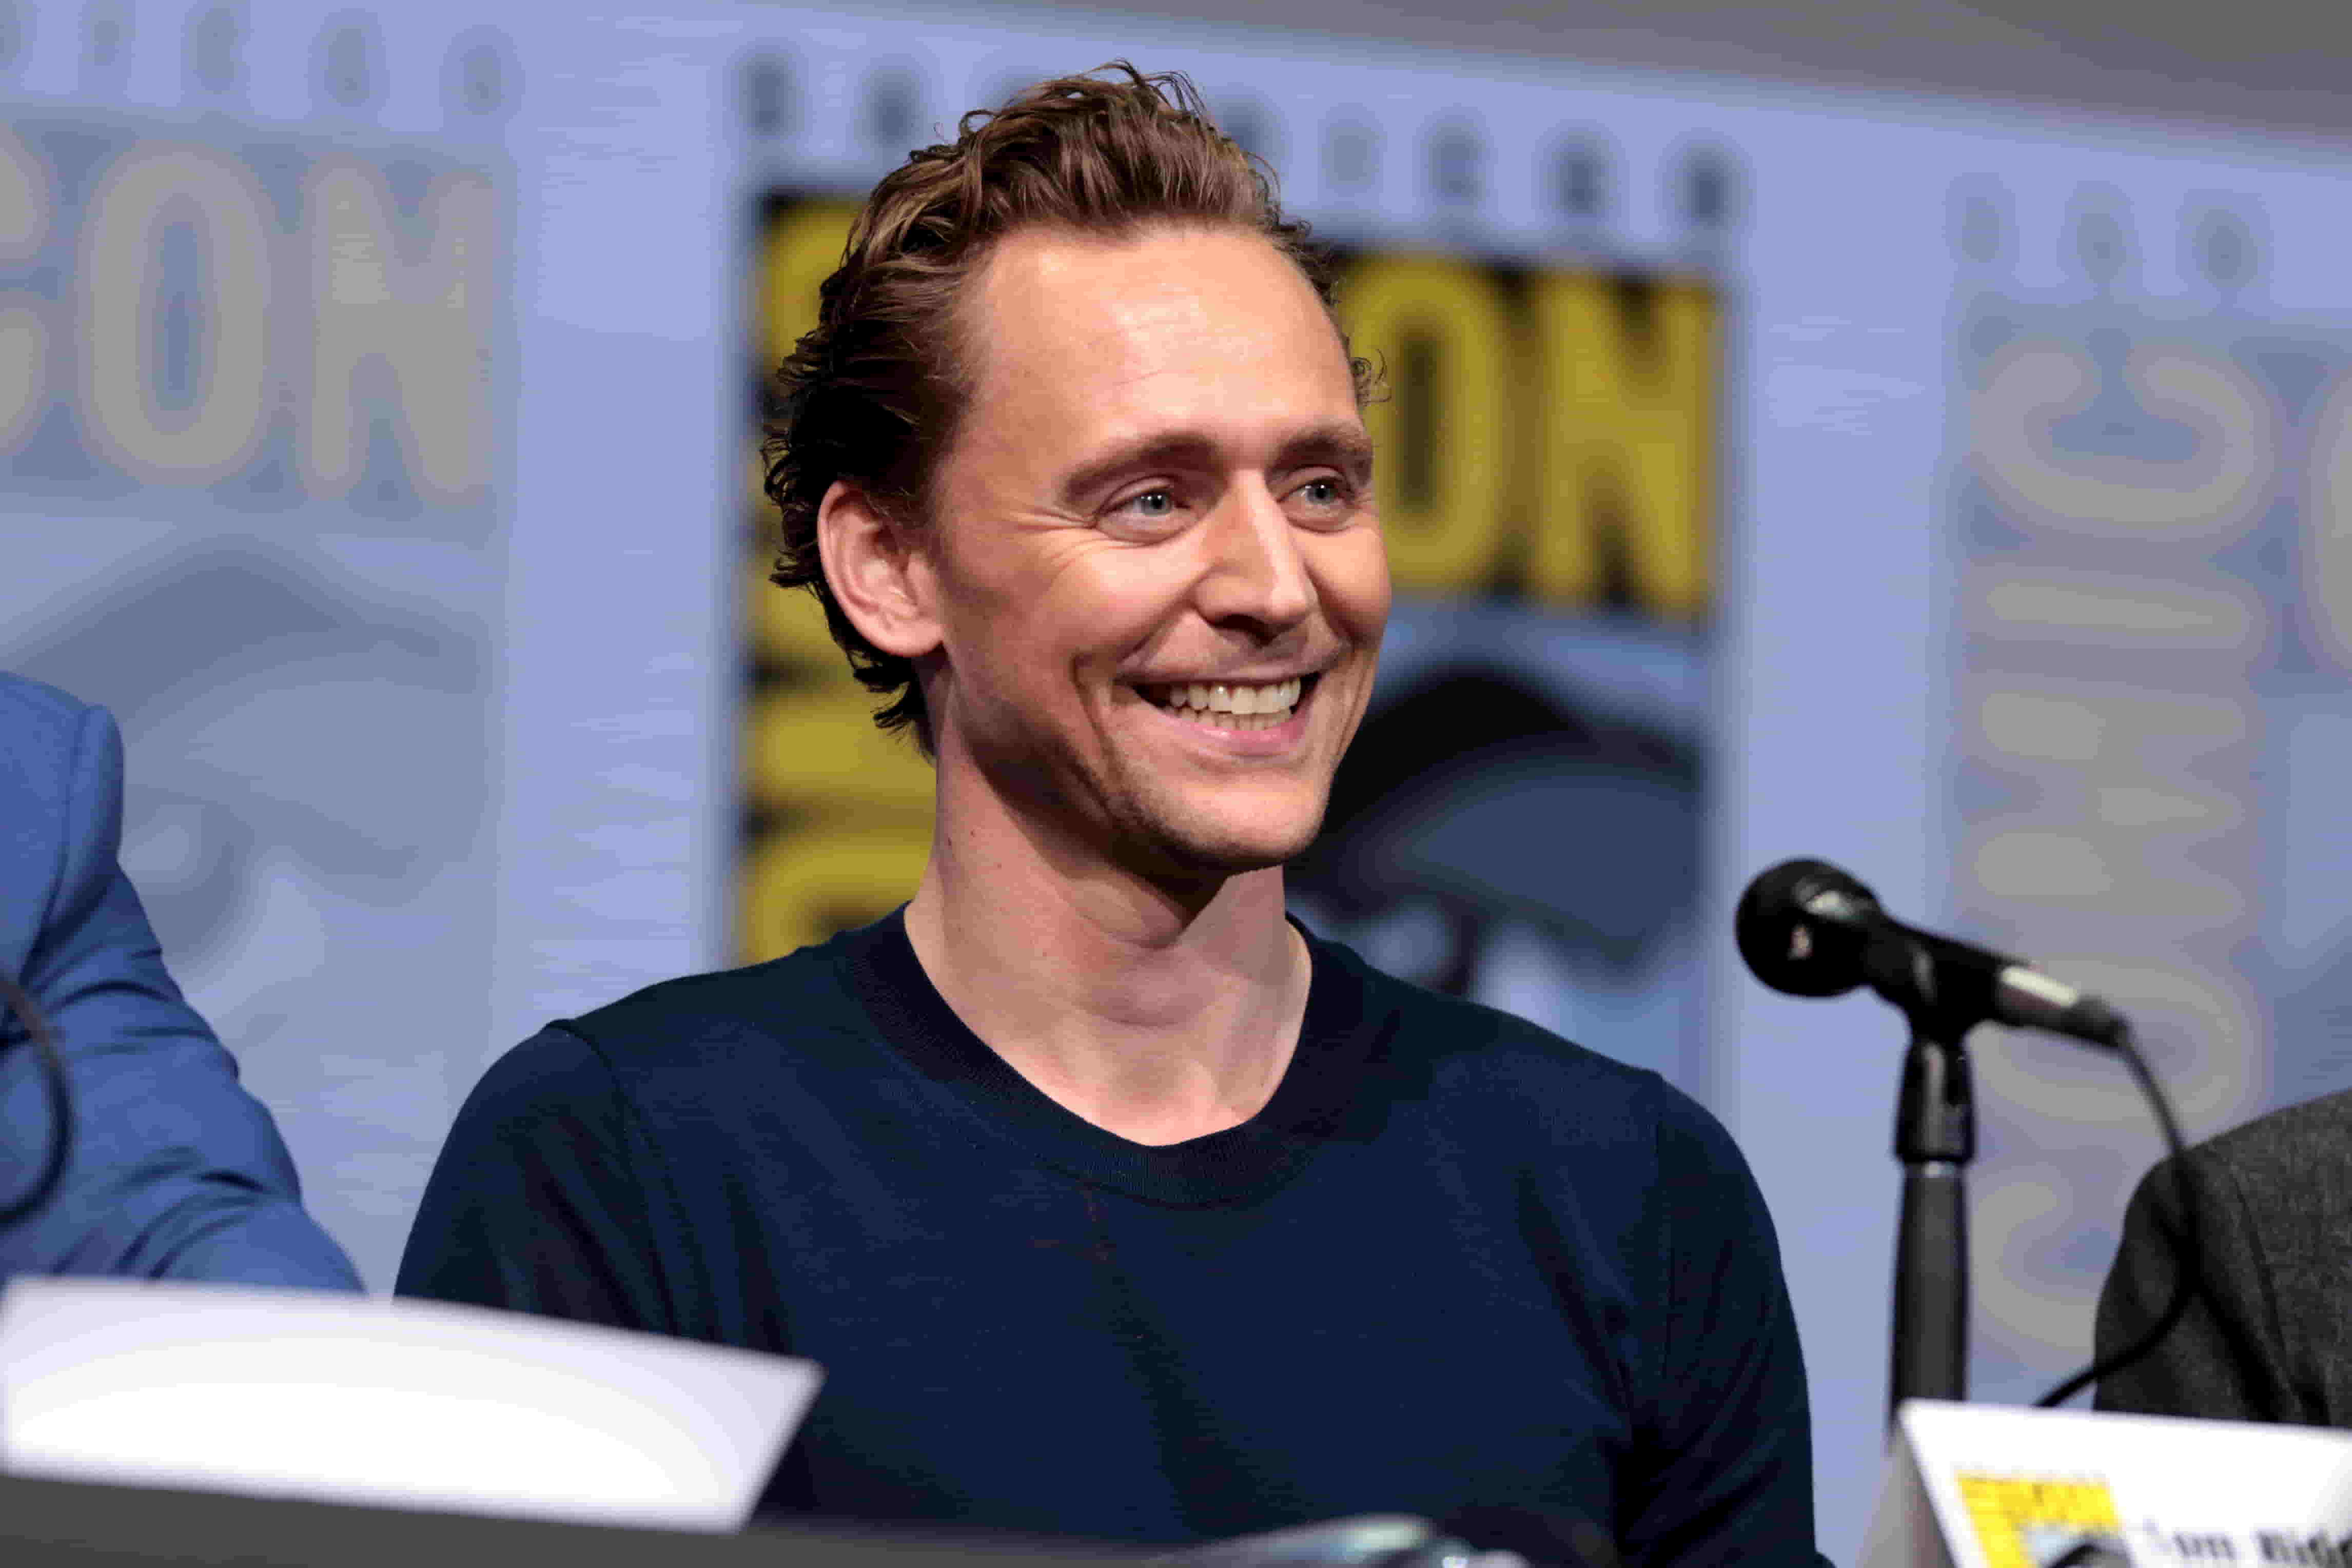 Tom Hiddleston is in a dark blue t-shirt at a Comicon event, sitting with a microphone kept in front of him